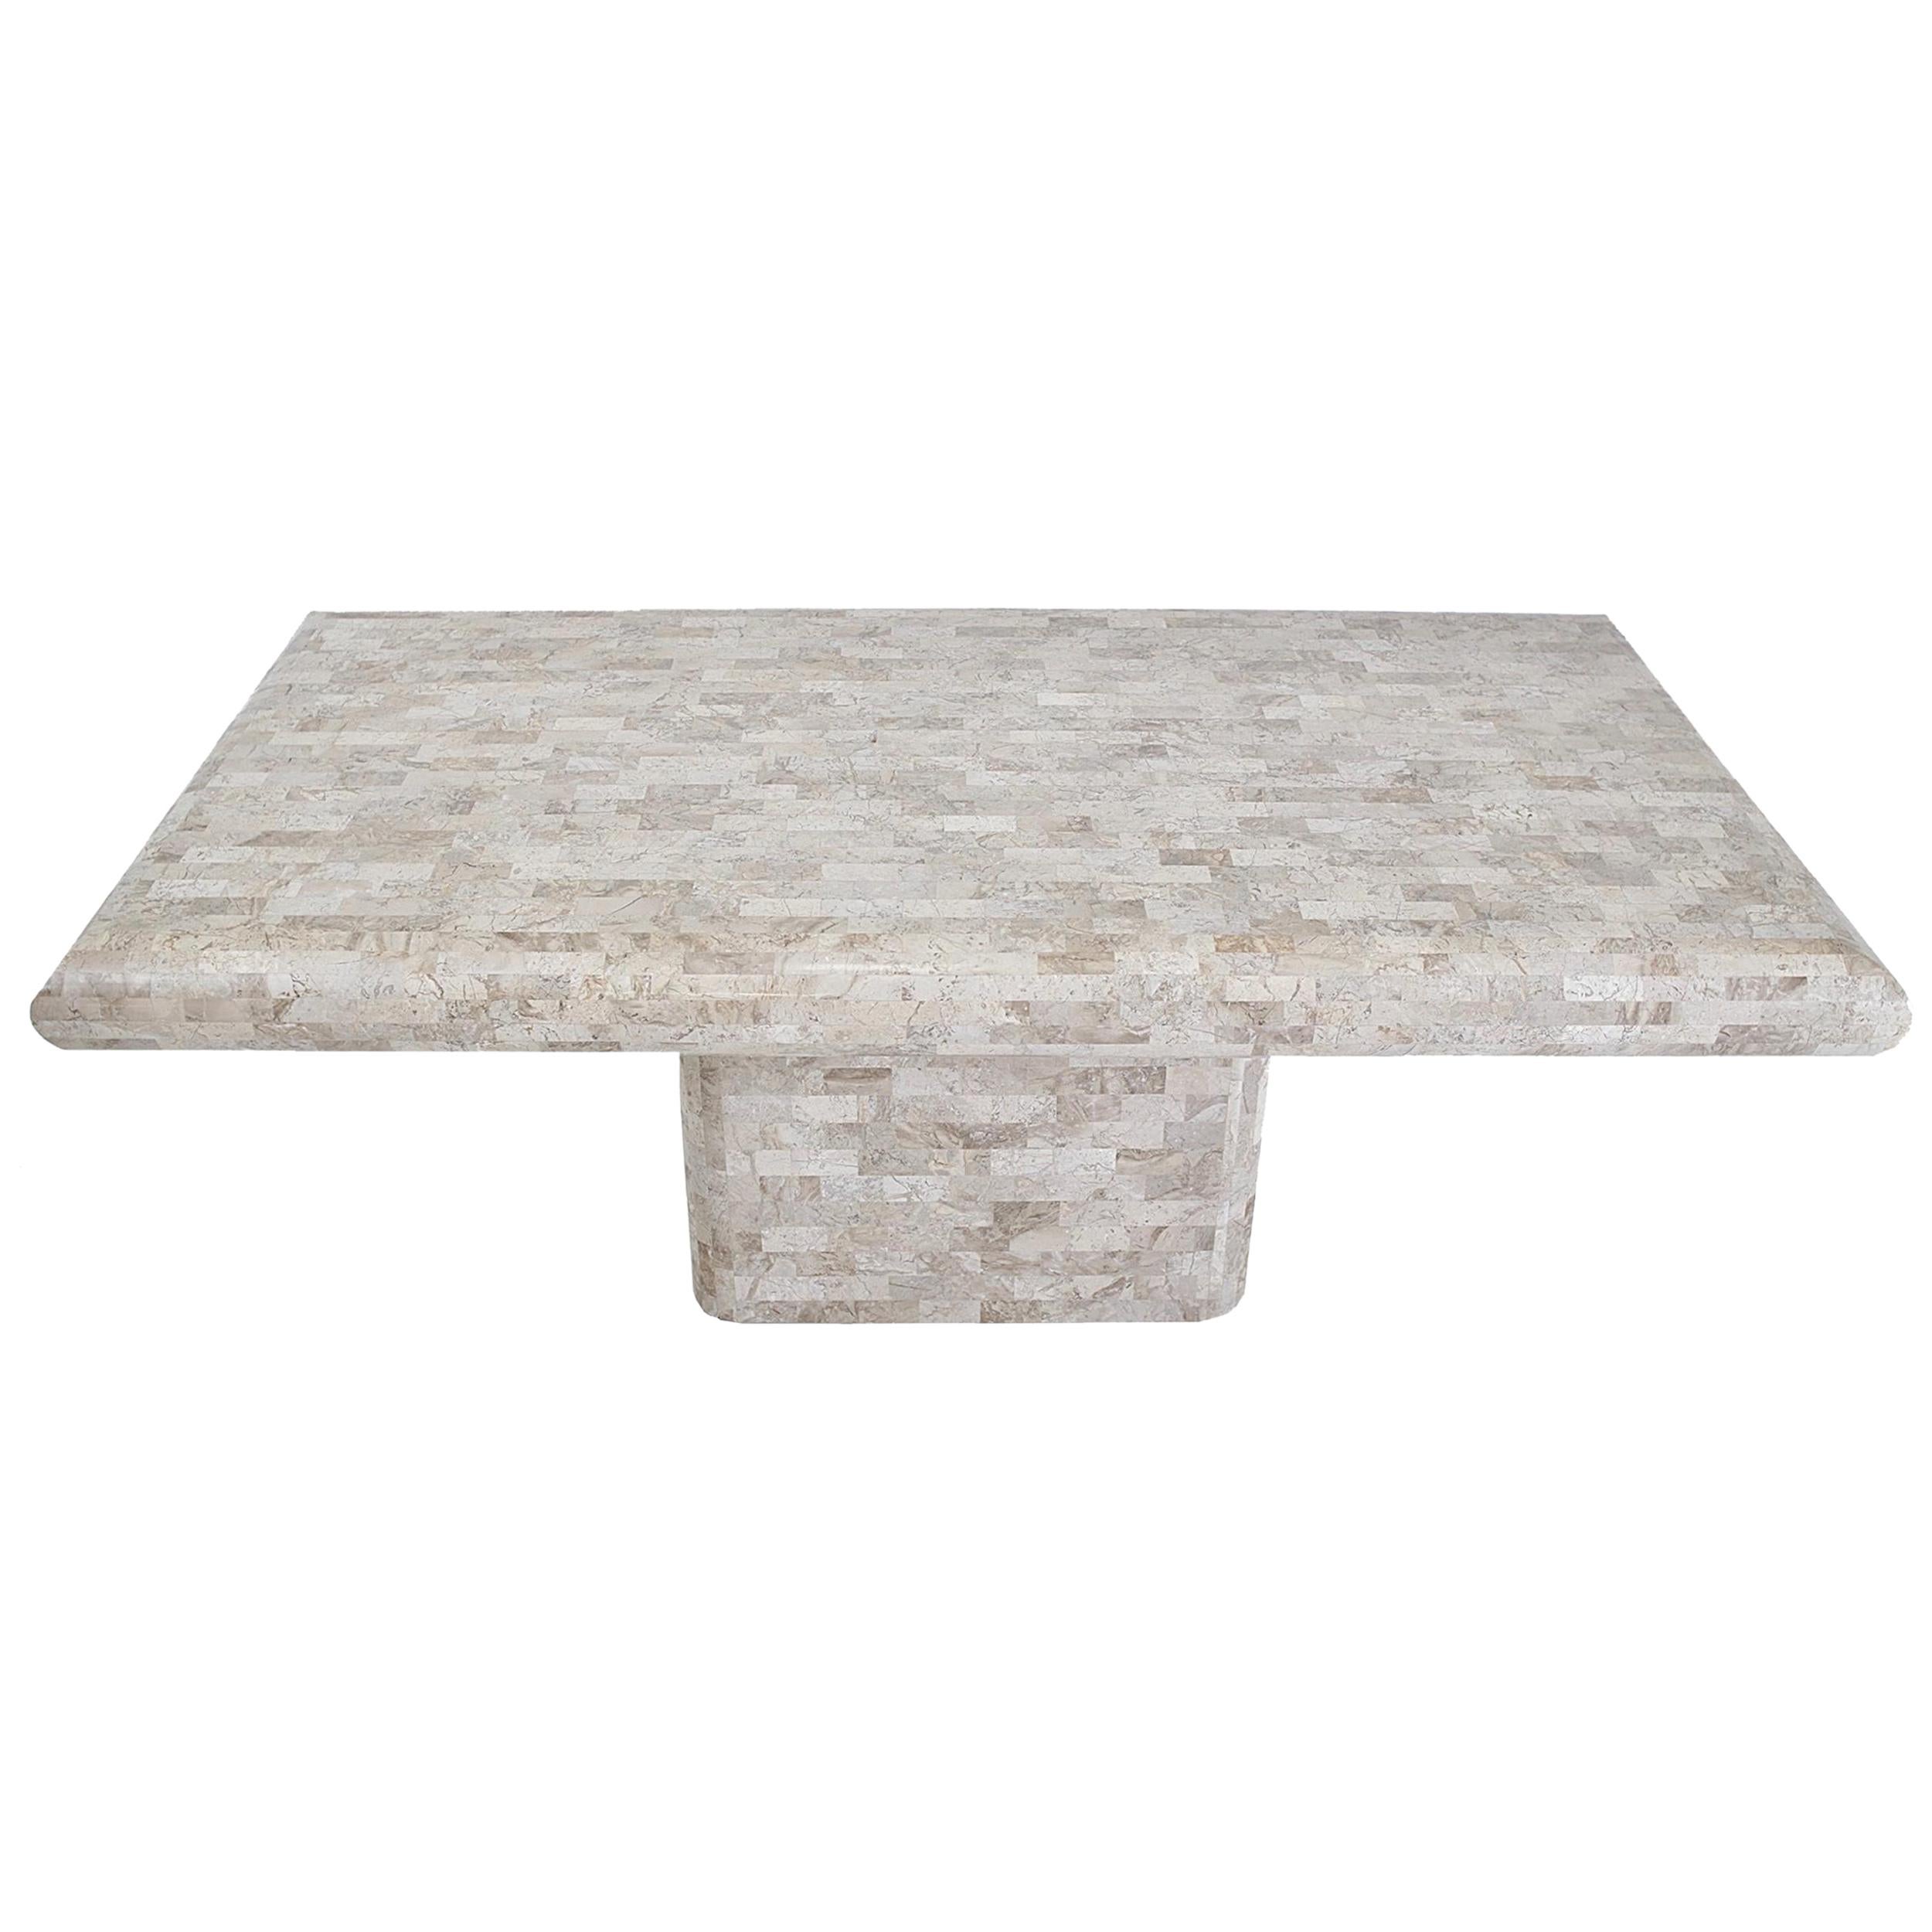 Tessellated Travertine Dining Table, 1970s